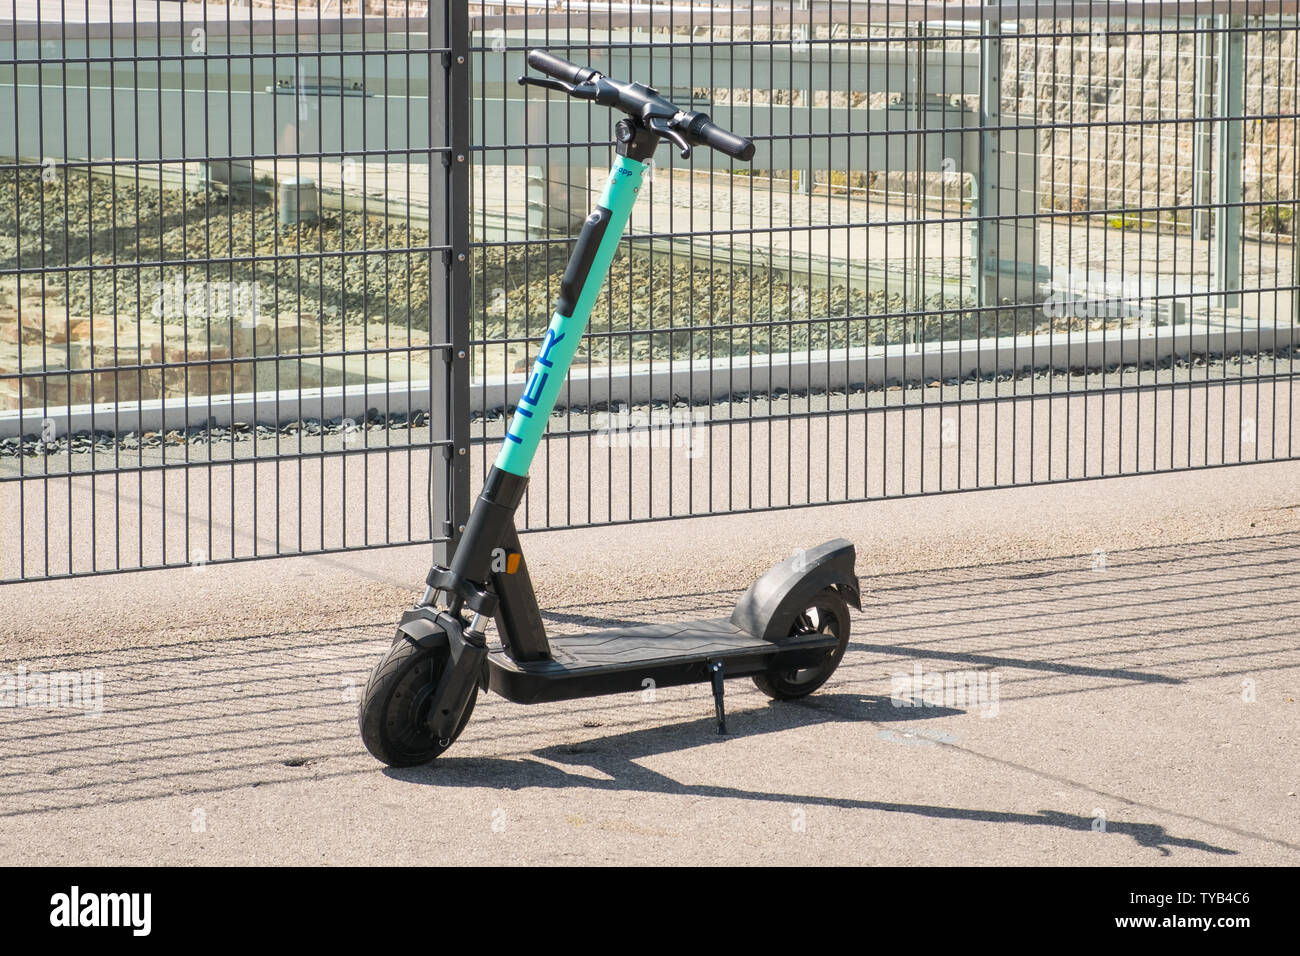 Berlin, Germany - June, 2019: Electric scooter , escooter or e-scooter of the ride sharing company TIER on sidewalk in Berlin, Germany Stock Photo